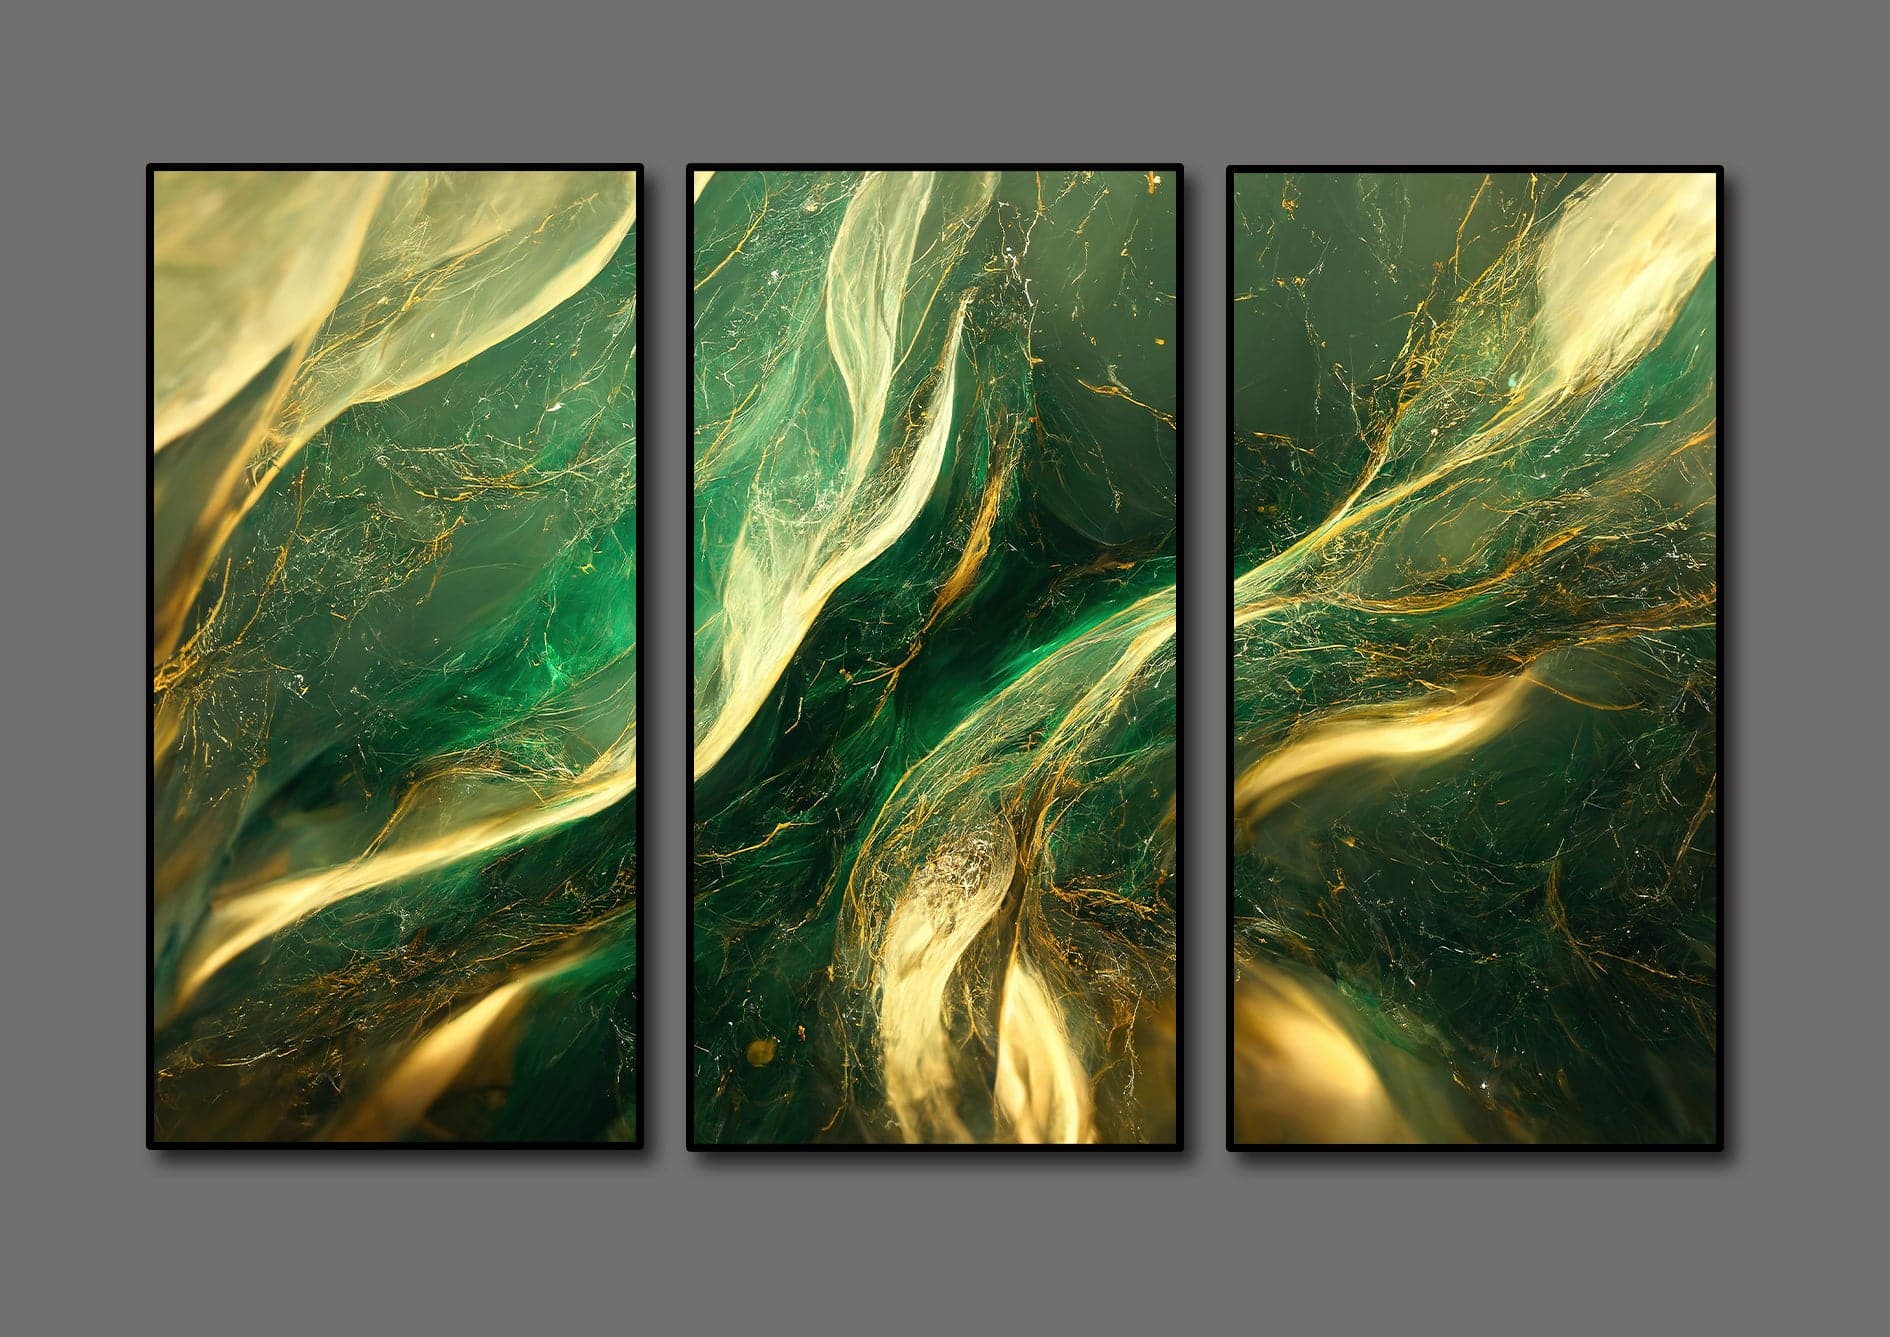 Framed 3 Panels  - Abstract - Green and Gold Marble Texture